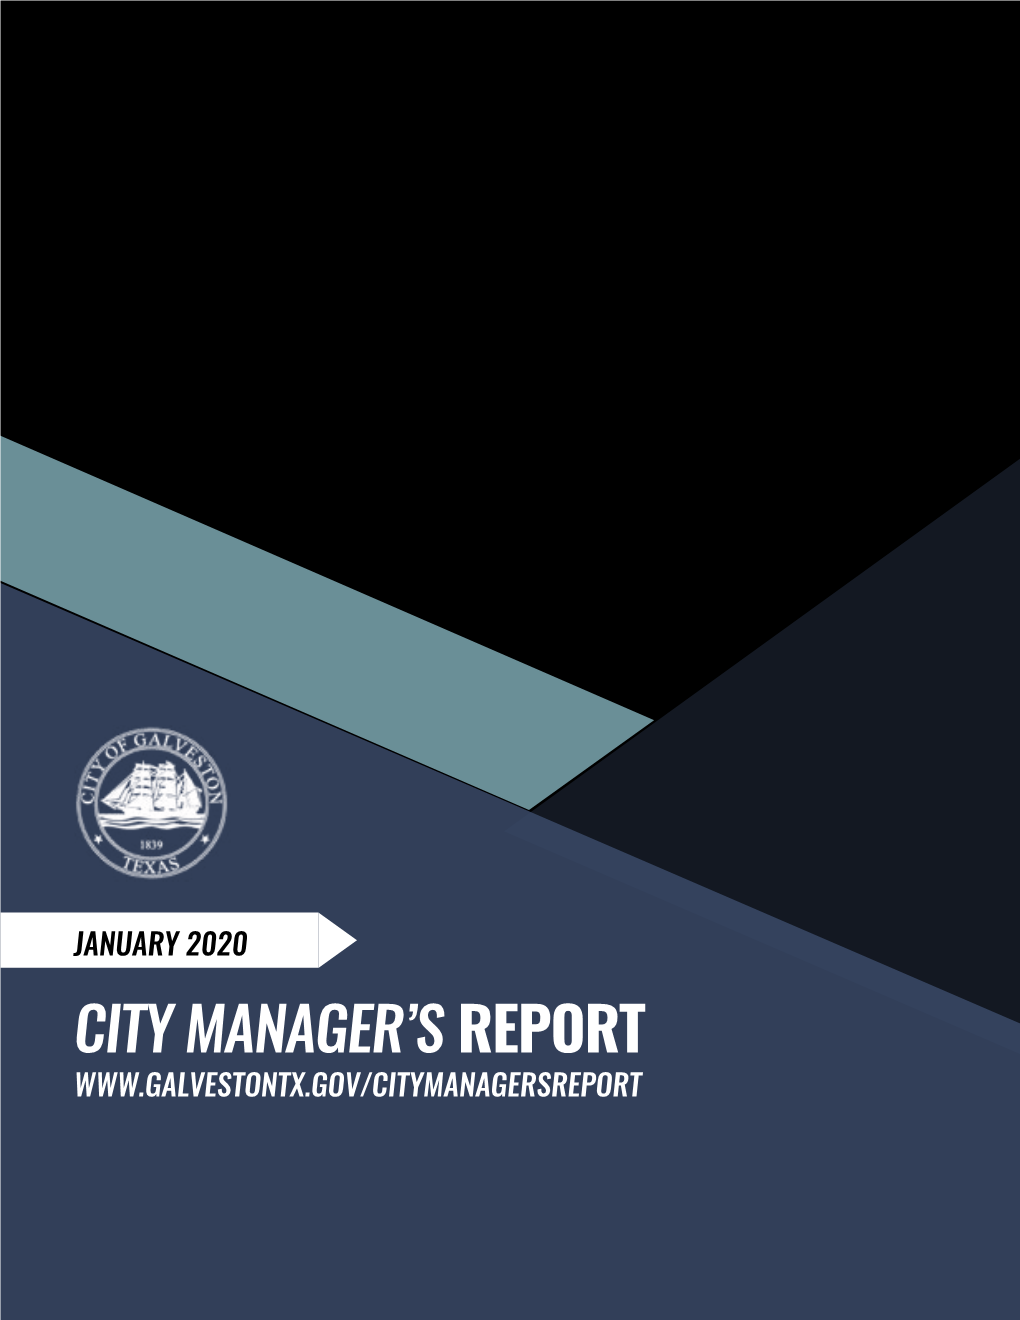 City Manager's Report